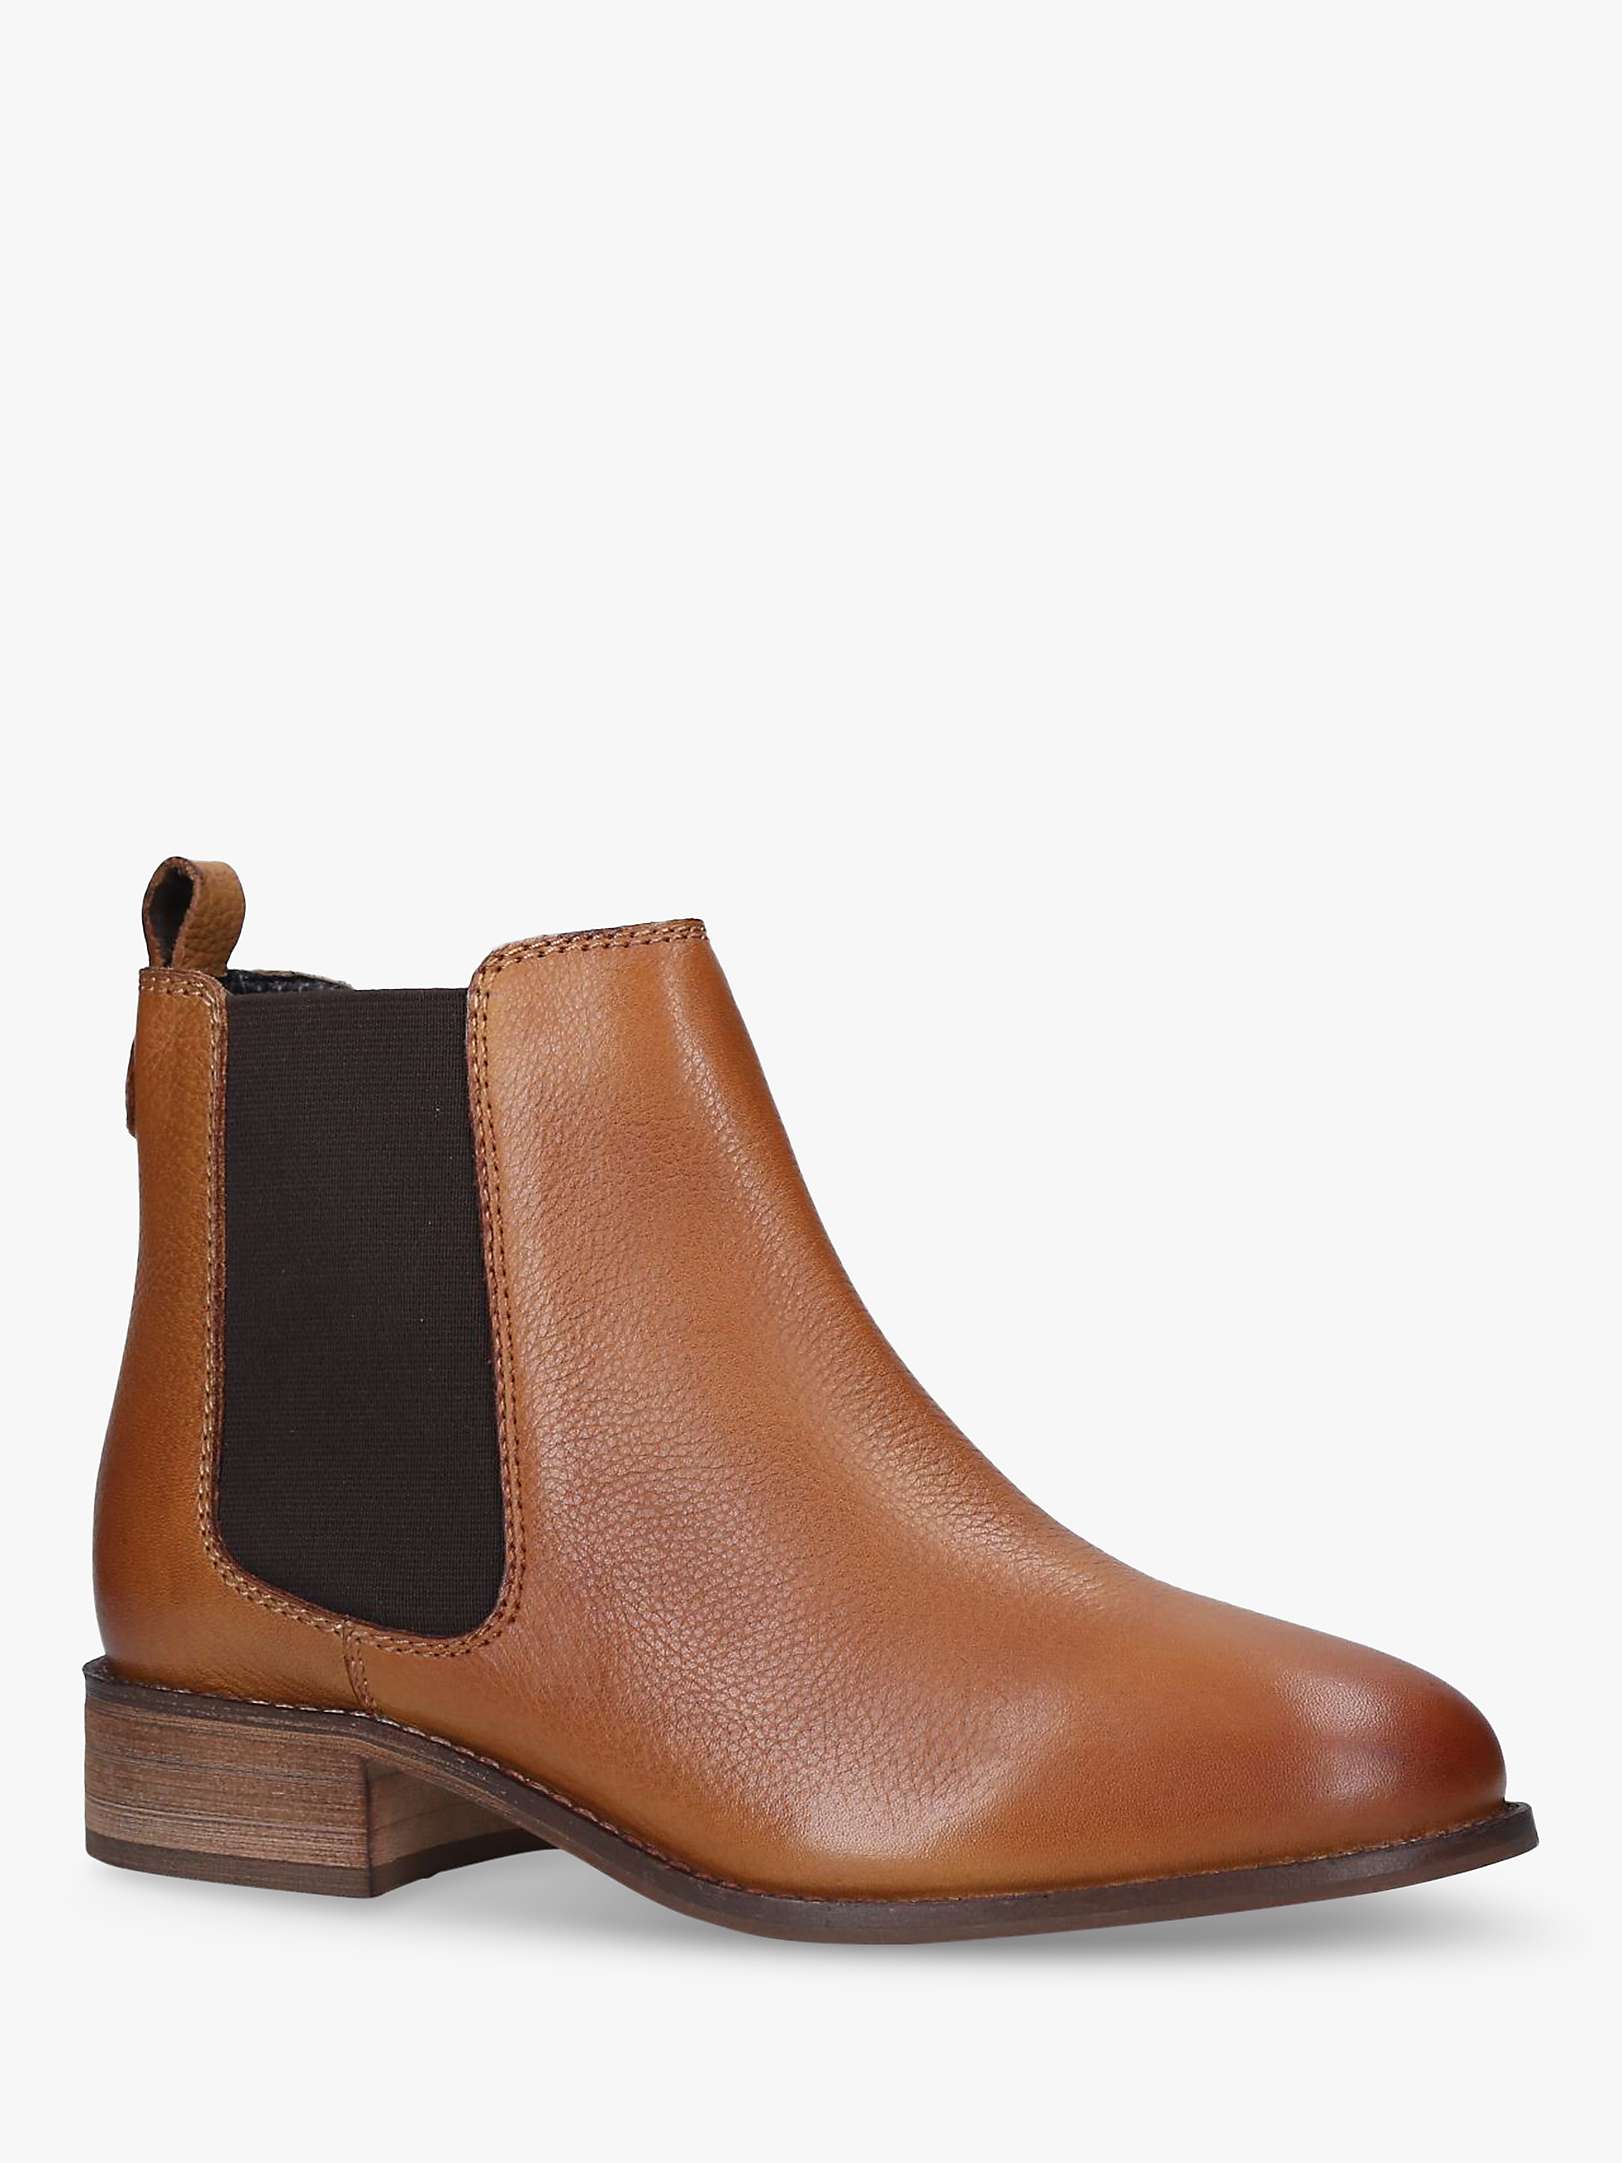 Carvela Stormy Leather Chelsea Boots, Tan at John Lewis & Partners